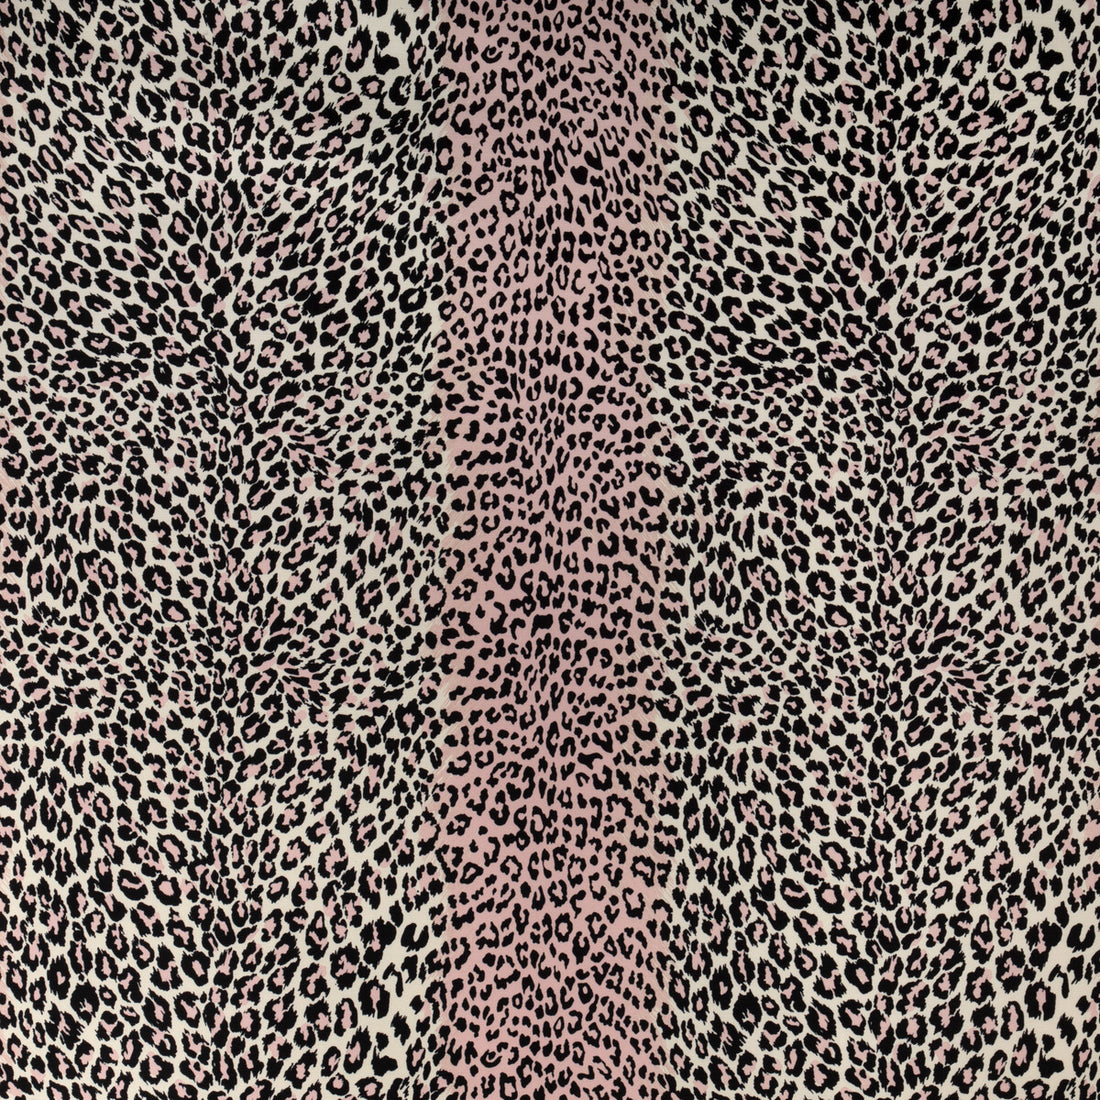 Leopard II fabric in rose color - pattern 8023125.17.0 - by Brunschwig &amp; Fils in the Madeleine Castaing Indoor/Outdoor collection